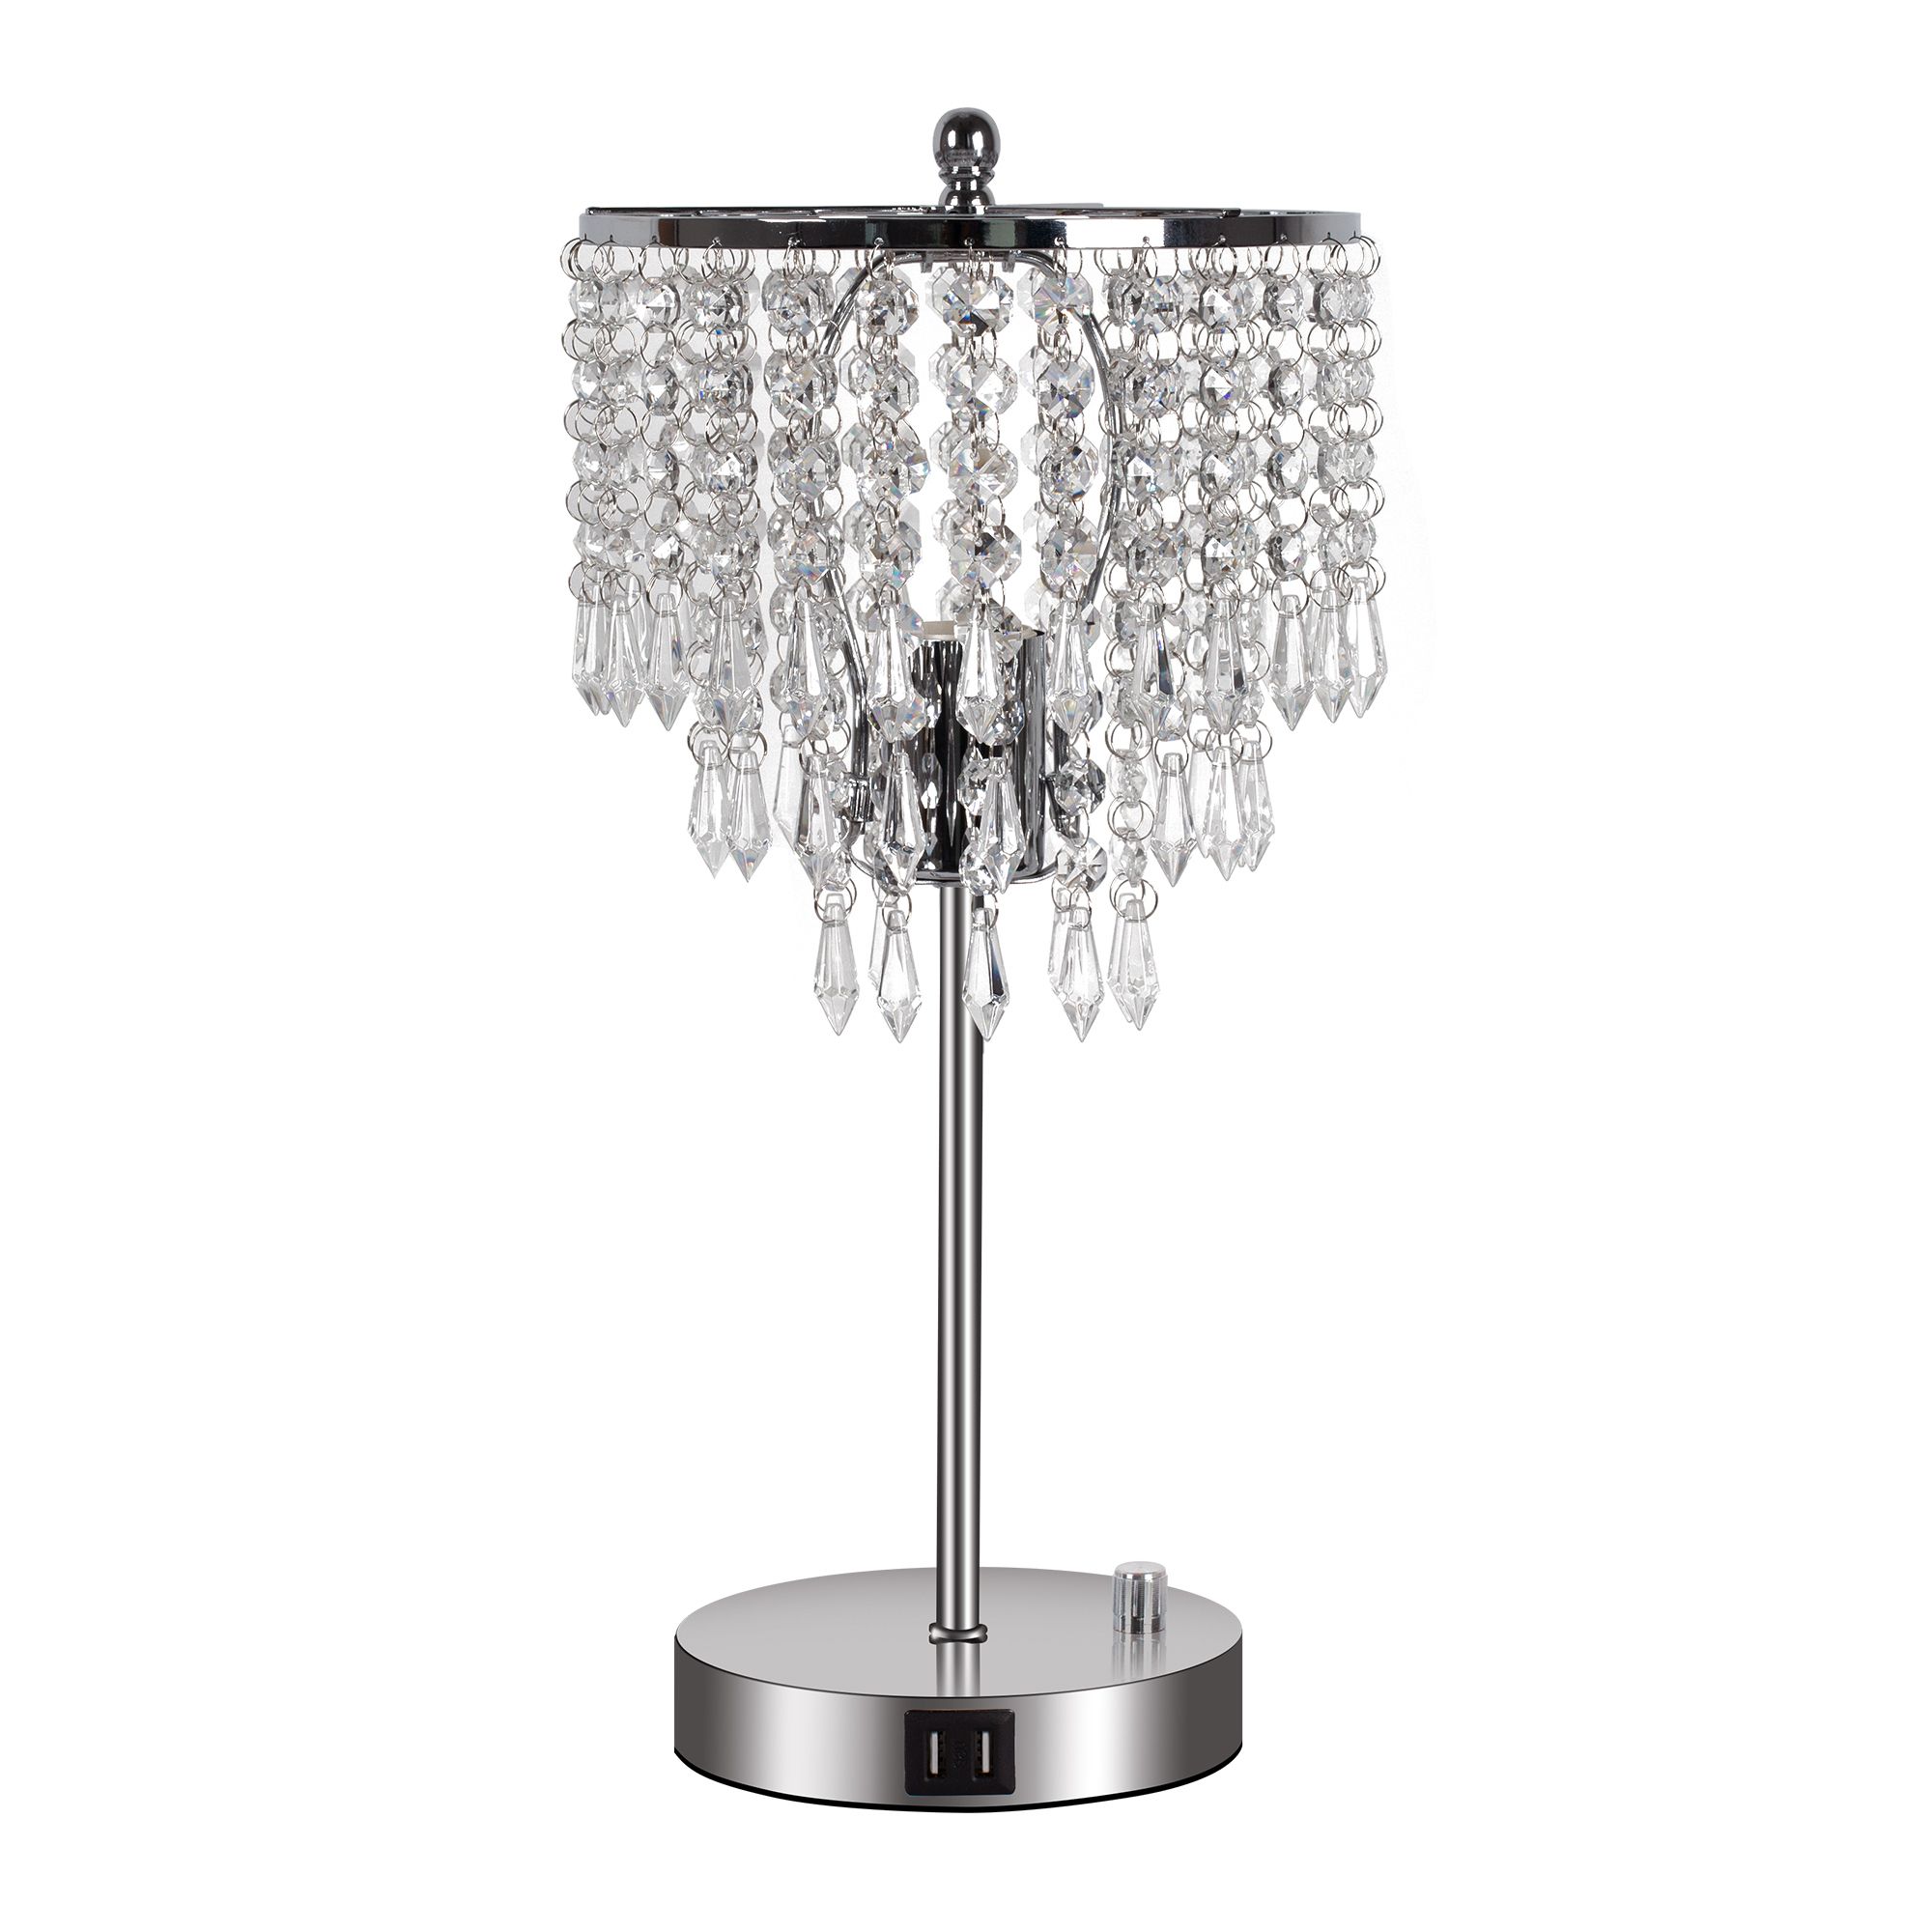 Preferred Crystal Bead Chandelier Floor Lamps Pertaining To Lohas Dual Usb Port Crystal Table Lamp,k9 Crystal Beads Desk Lamp With  Dimming Button,great For Bedroom Living Room – Walmart (View 12 of 15)